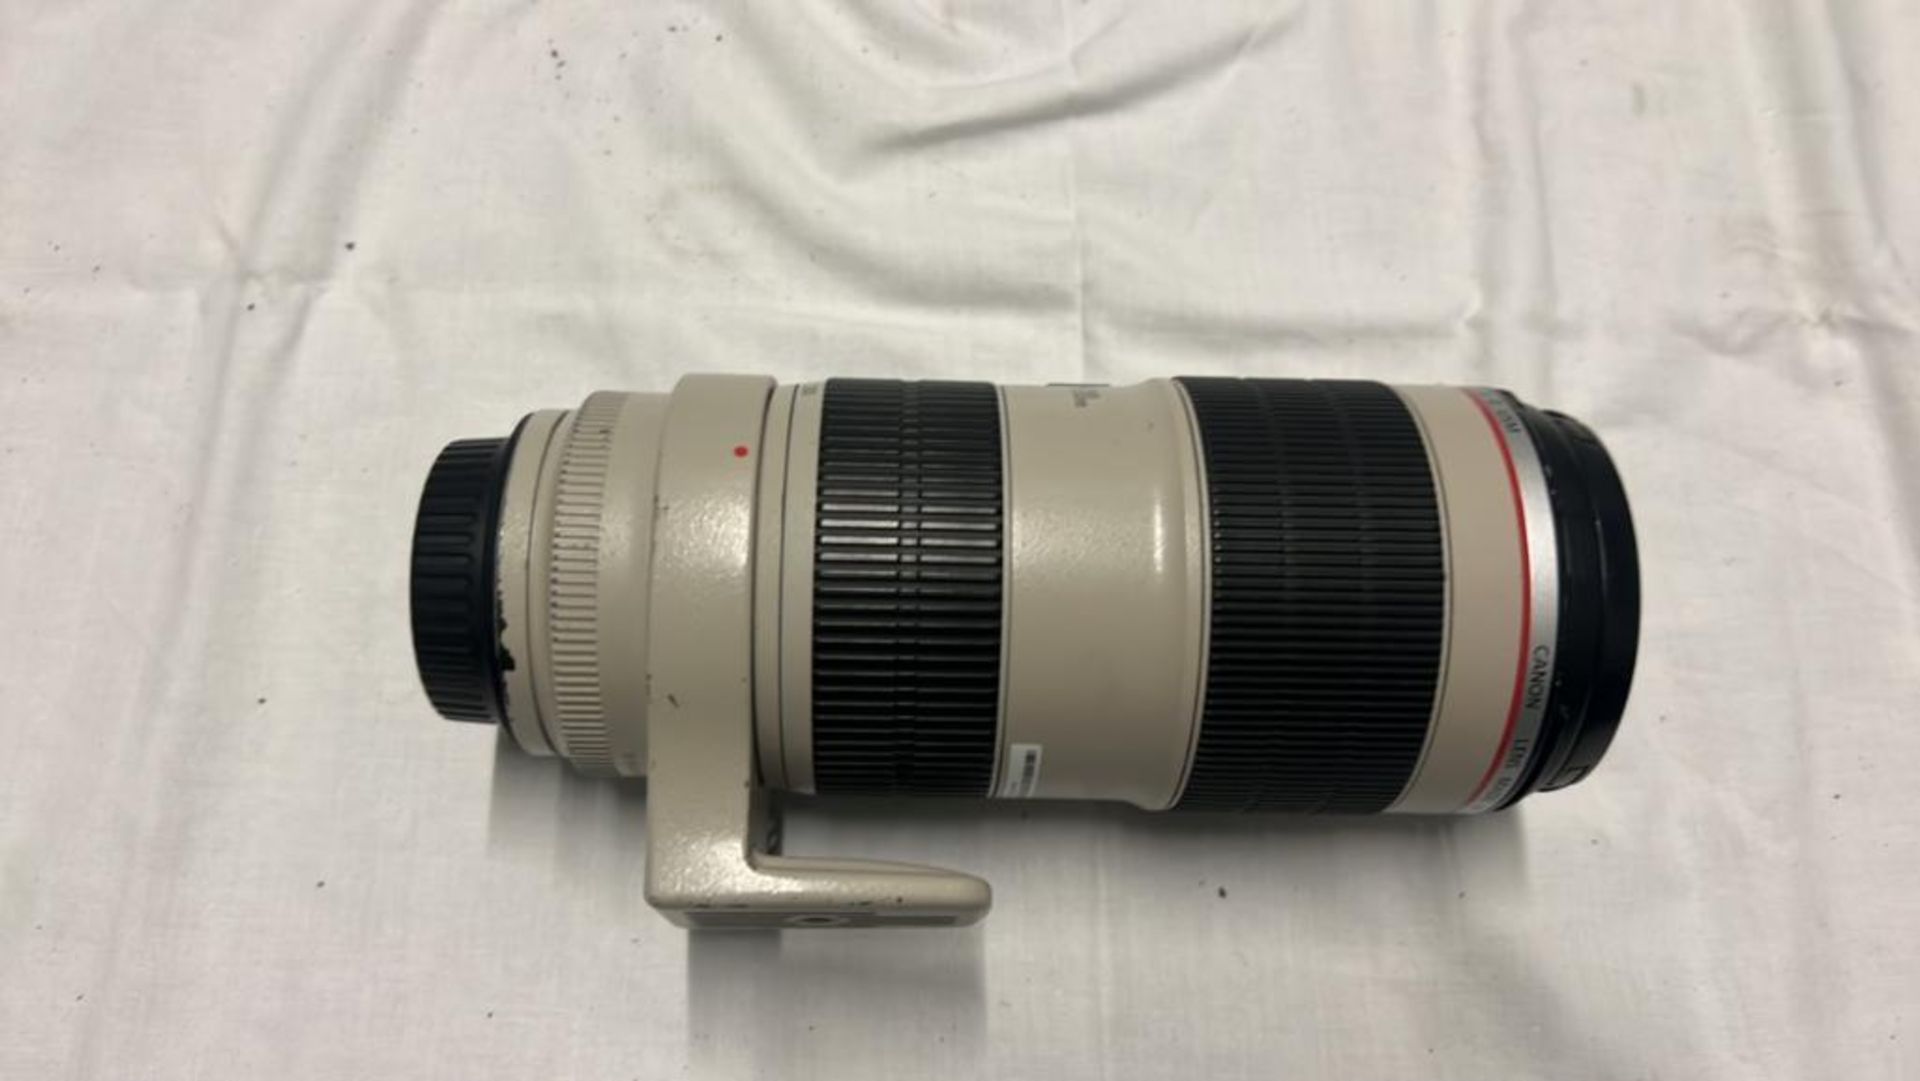 Canon EF 70-200mm f/2.8L USM Lens with Peli Case SN: 3160000360 - Image 2 of 6